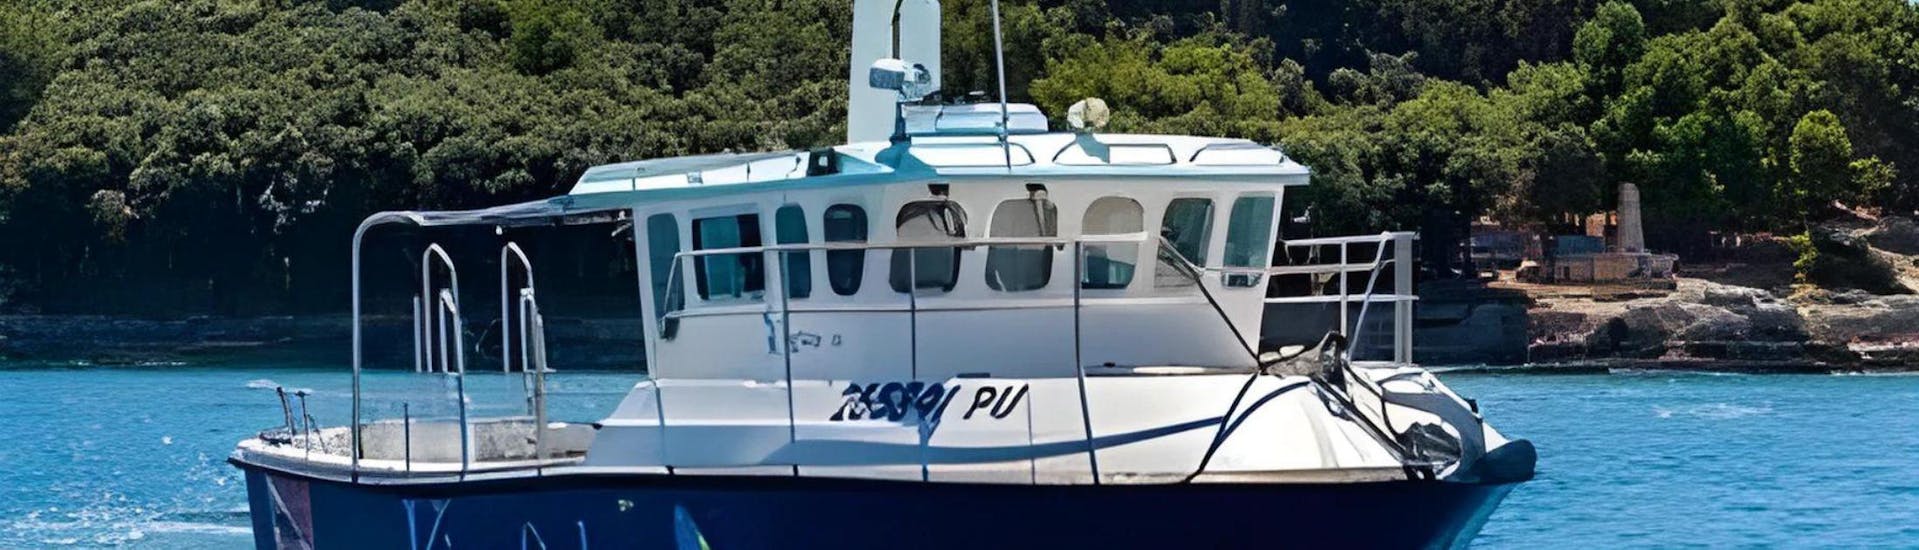 One of the Boats from Pula Boat Tours Croatia on the water, ready to leave for its trip along the coast of Pula. 